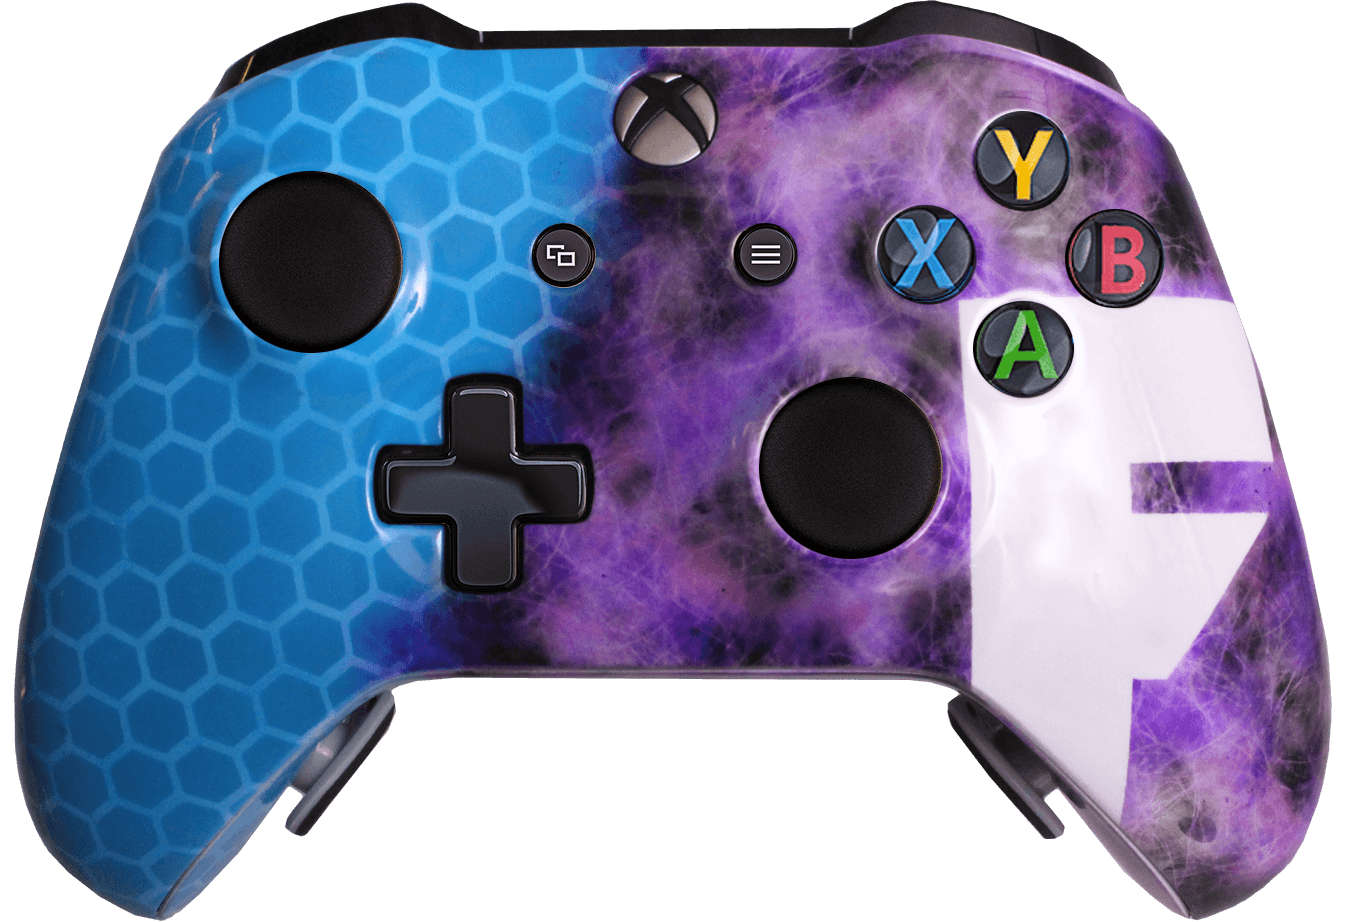 best modded xbox controller